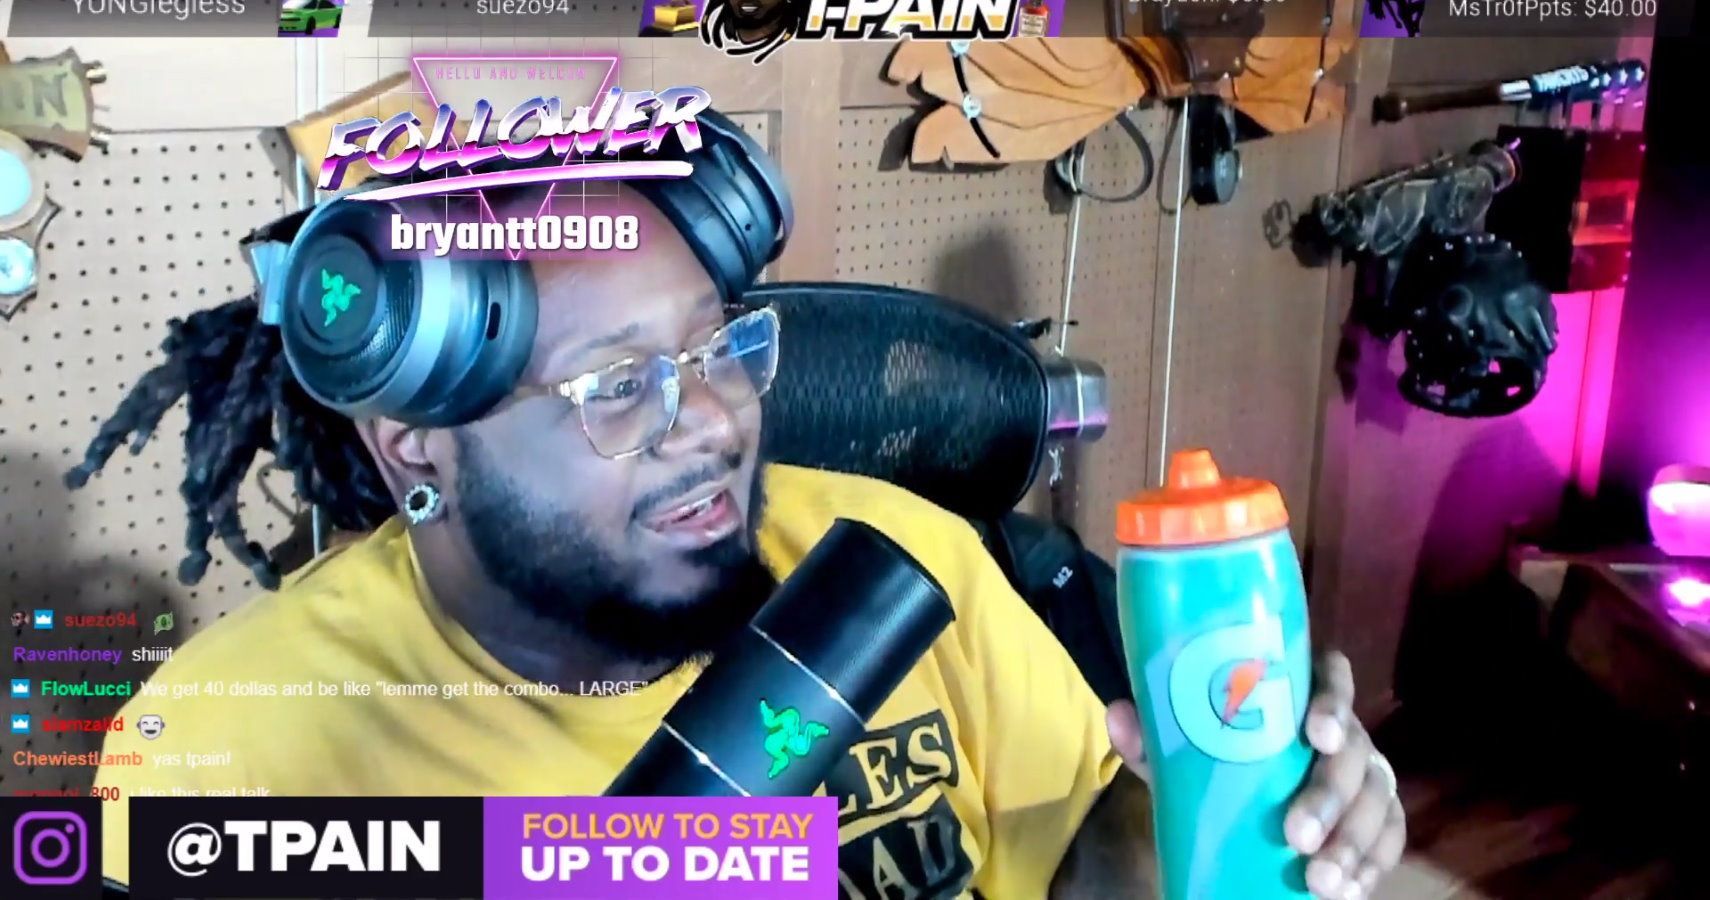 T-Pain on Twitch